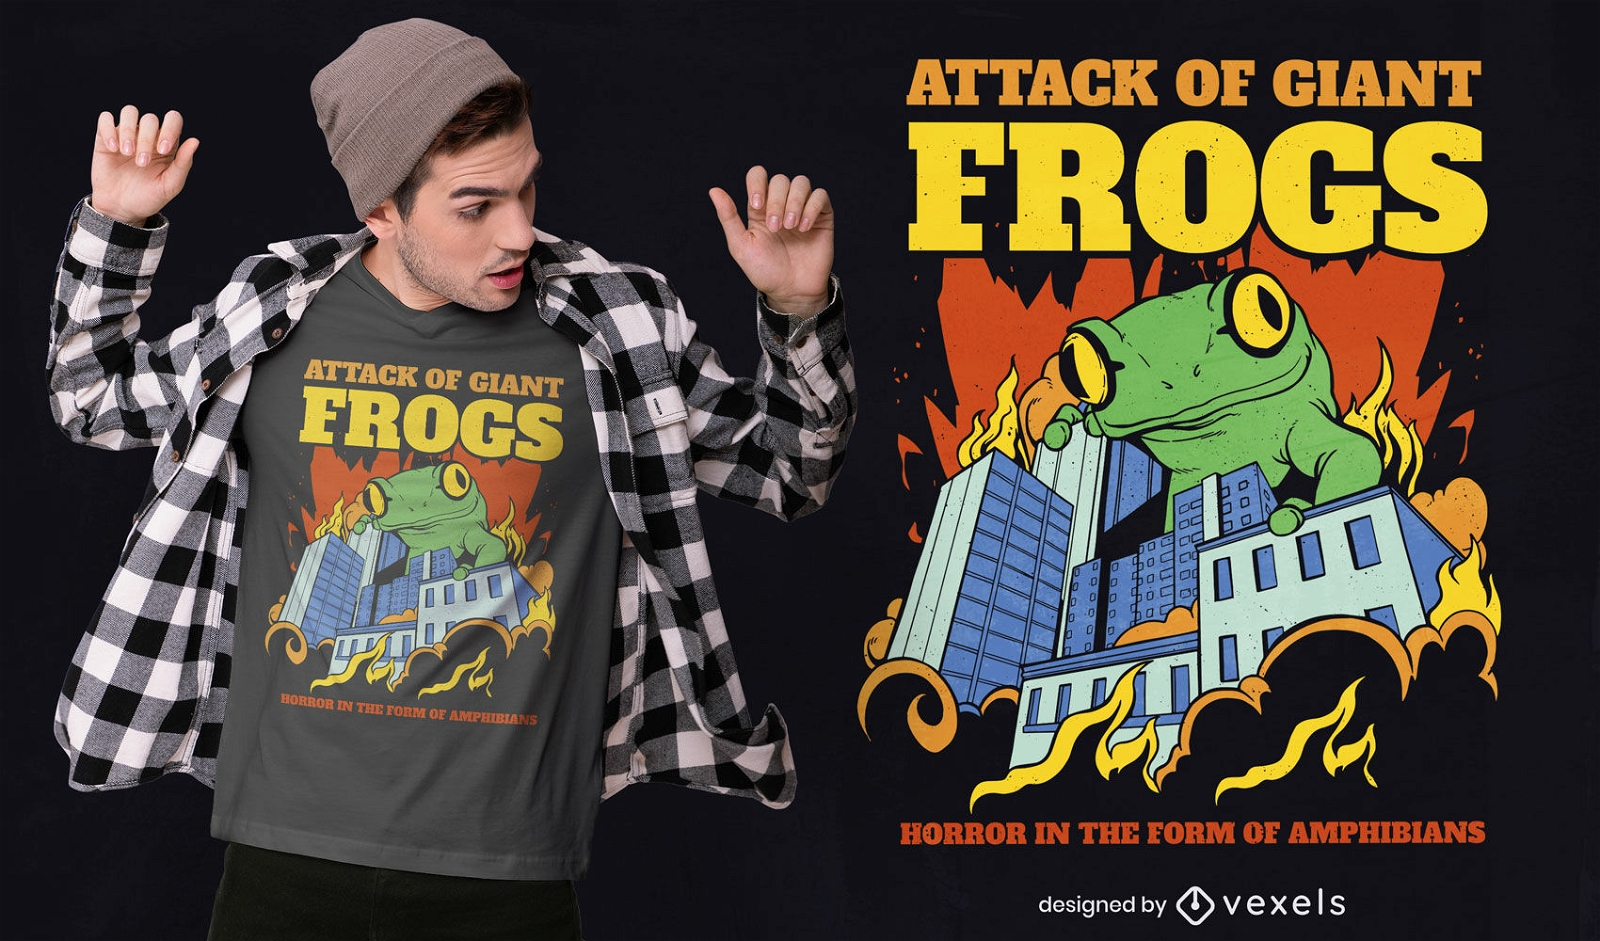 Giant frog attacking city t-shirt design